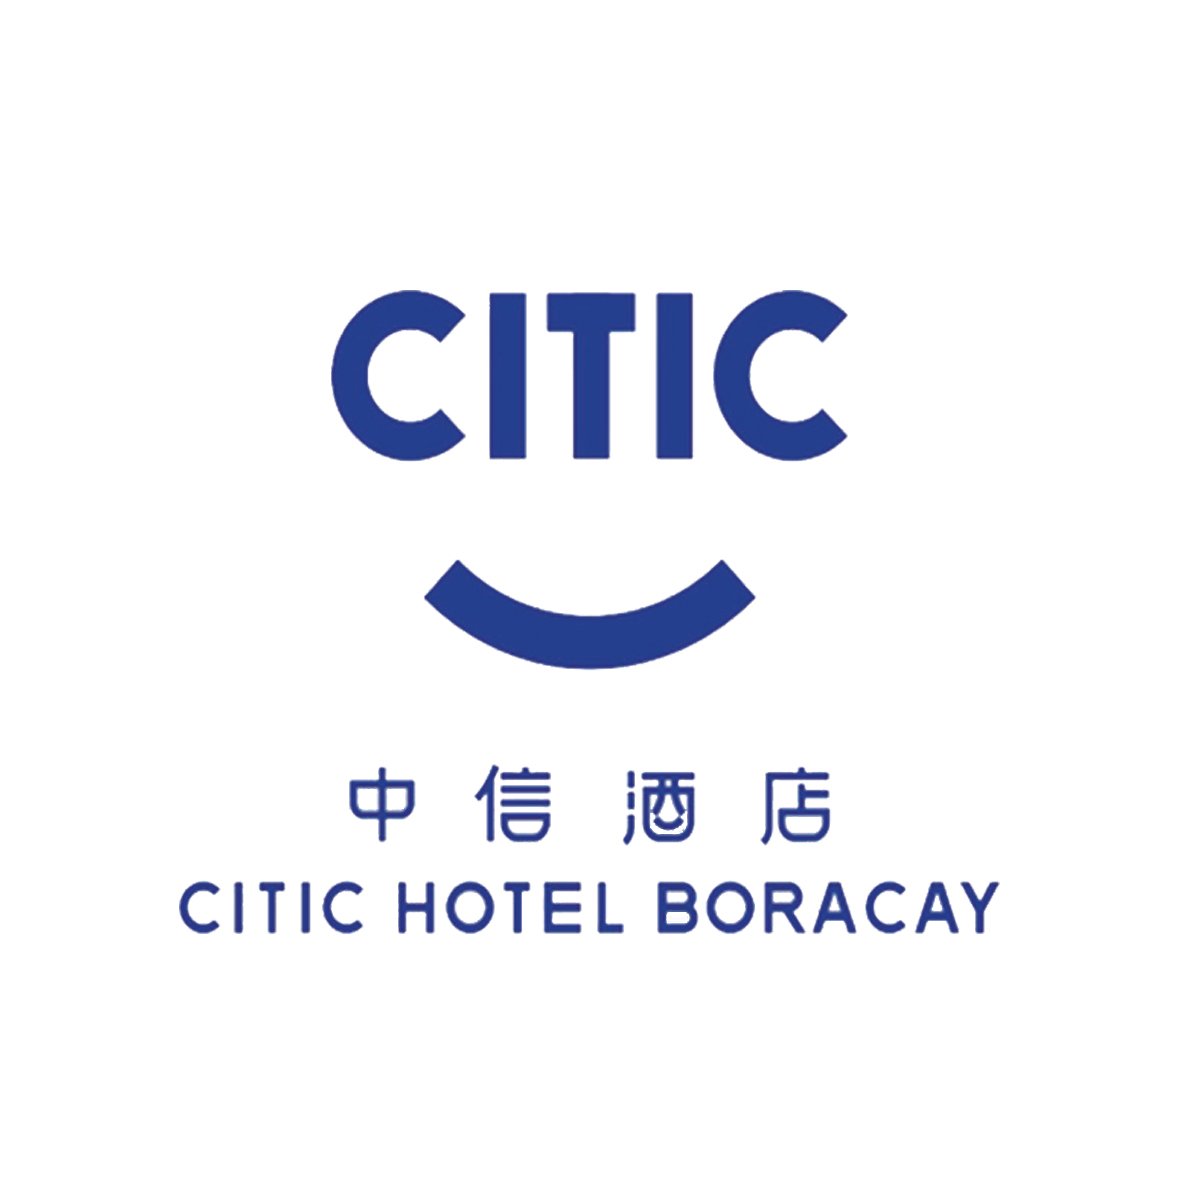 Giving you more reasons to be #HappyEveryDay

#BetterInCitic #UniquelyCitic